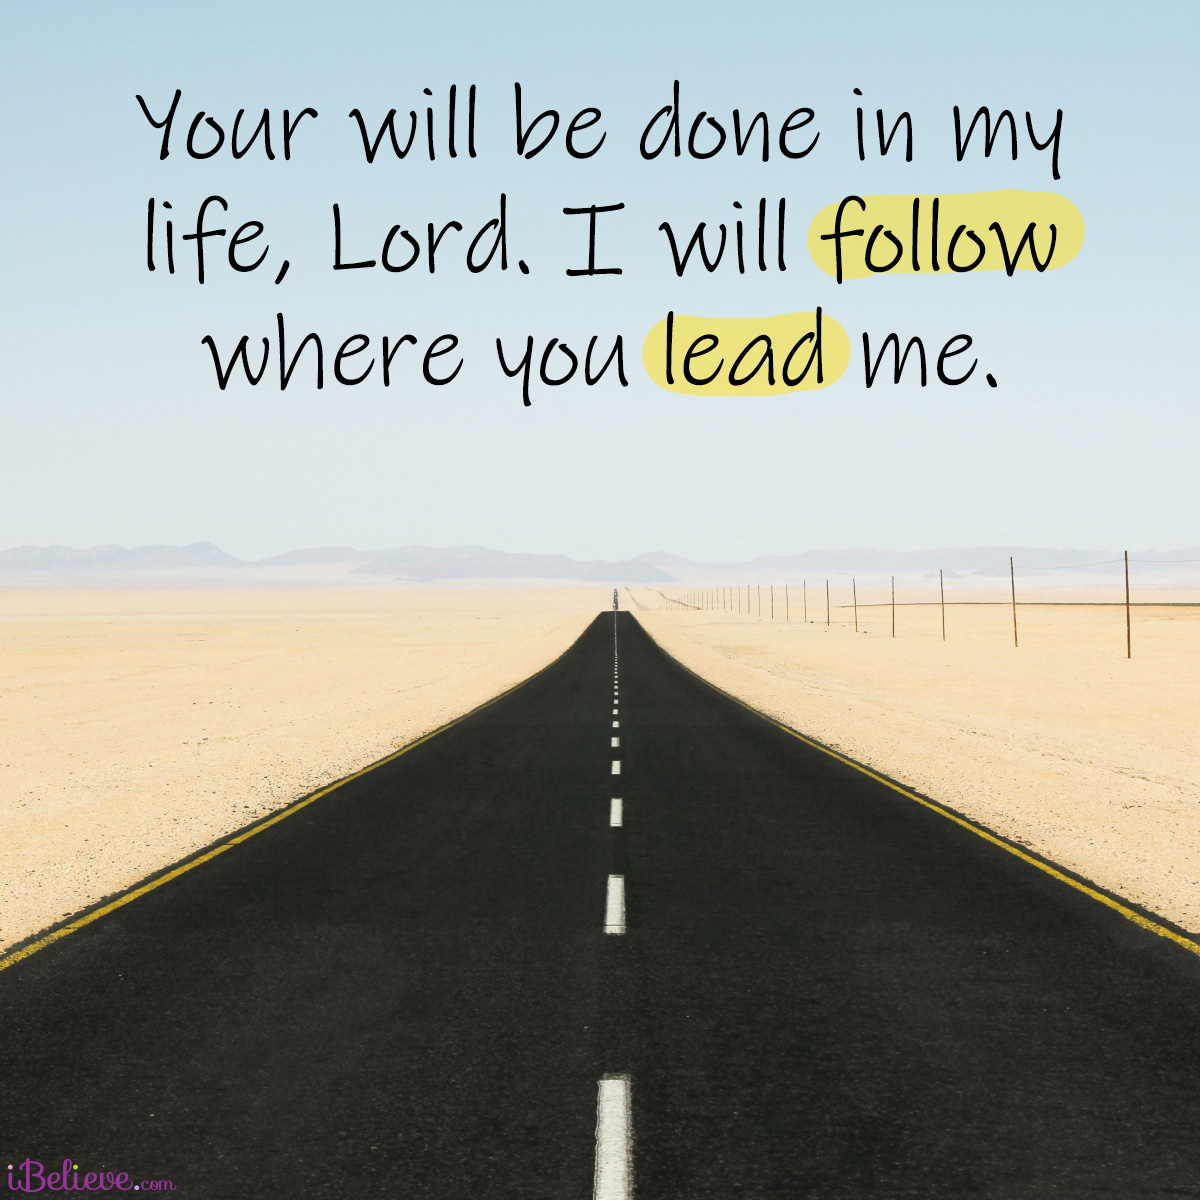 Following where God Leads, inspirational image